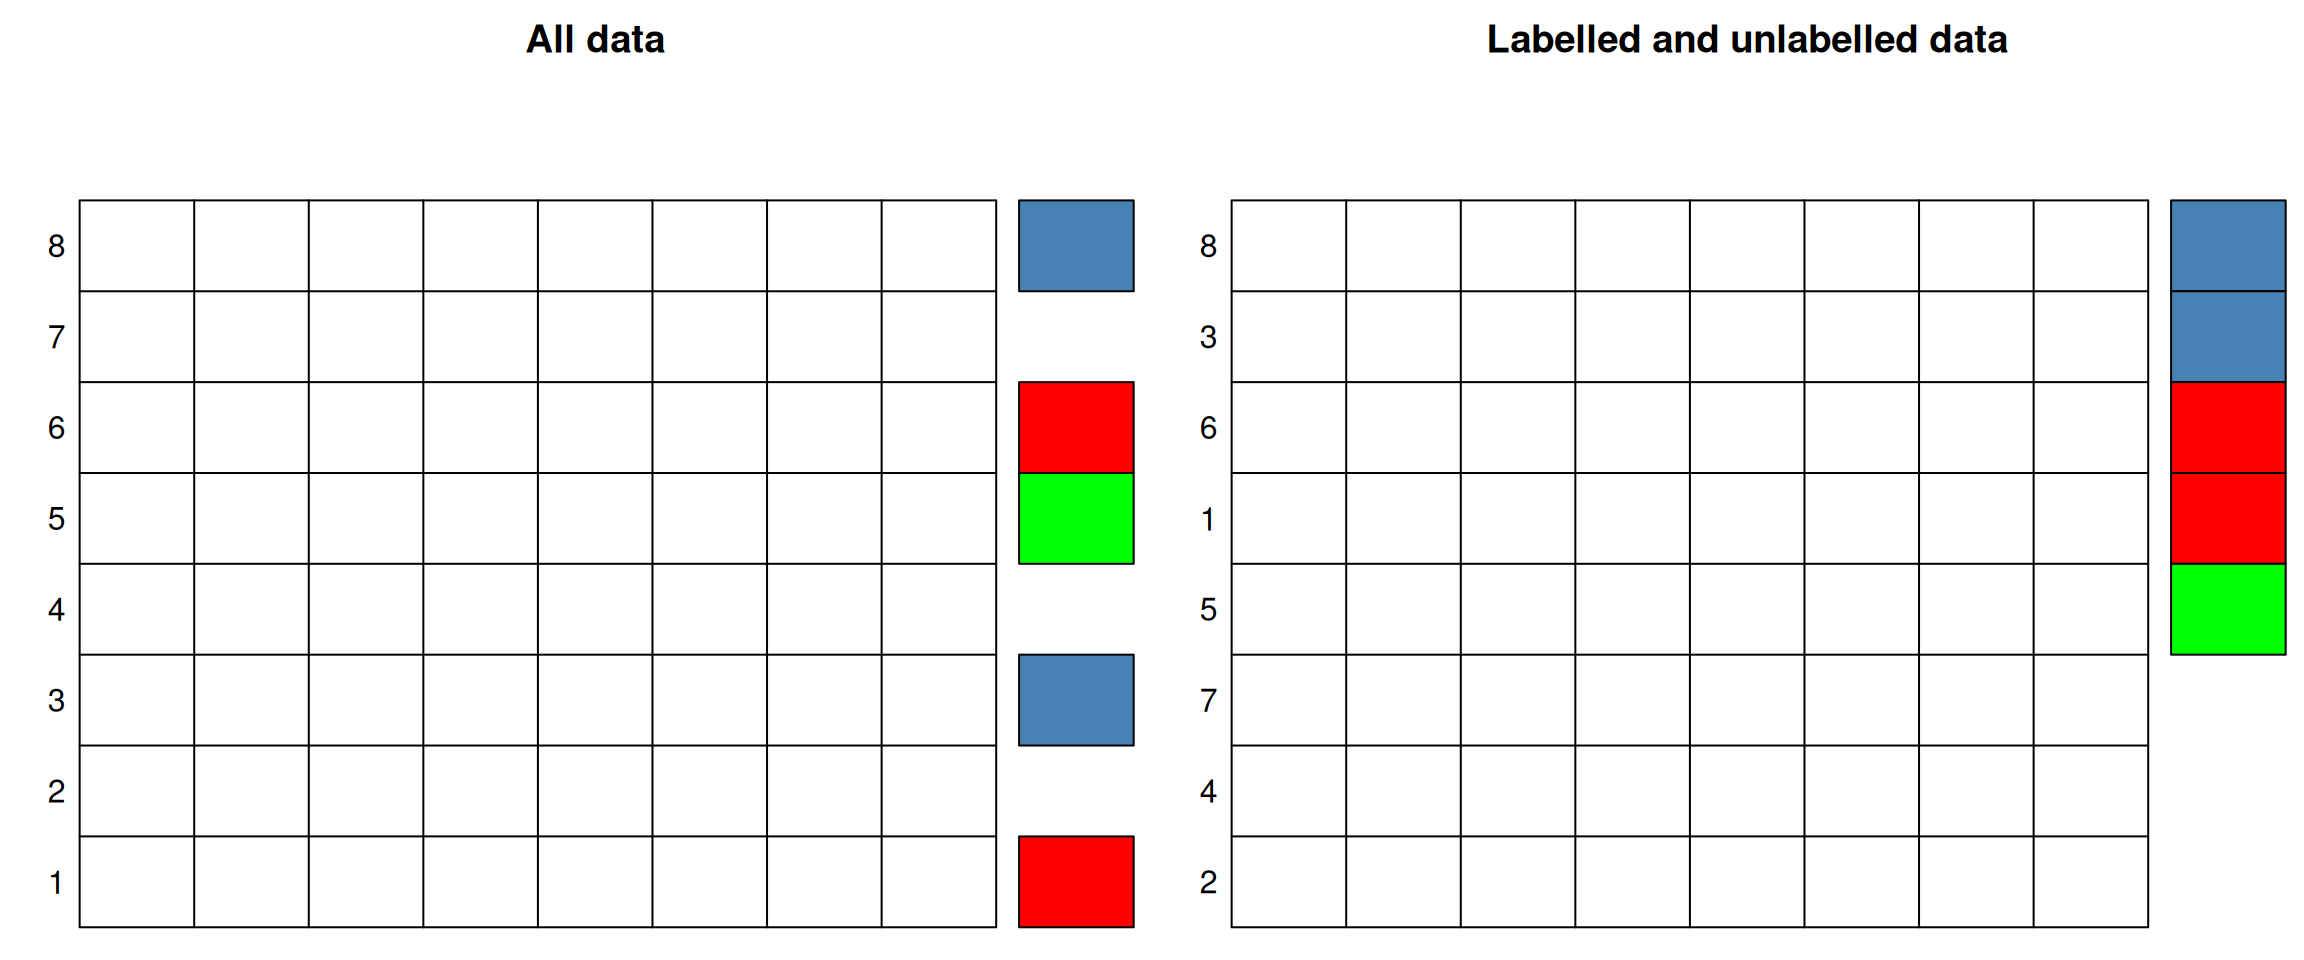 In supervised learning, the data are split in labelled or unlabelled data. The same applies when some of the columns are labelled.